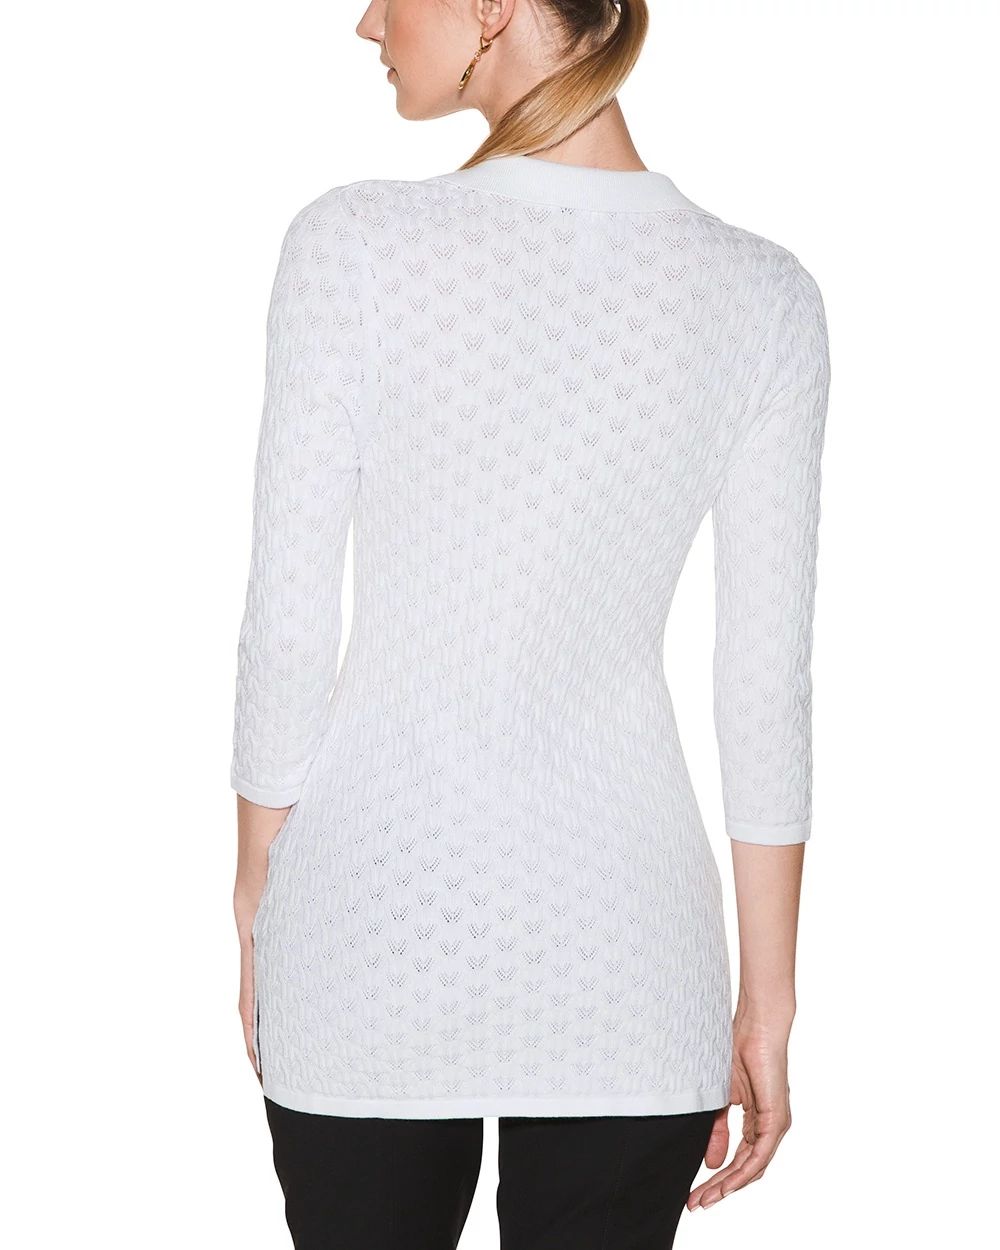 Outlet WHBM Open-Stitch Tunic Sweater click to view larger image.